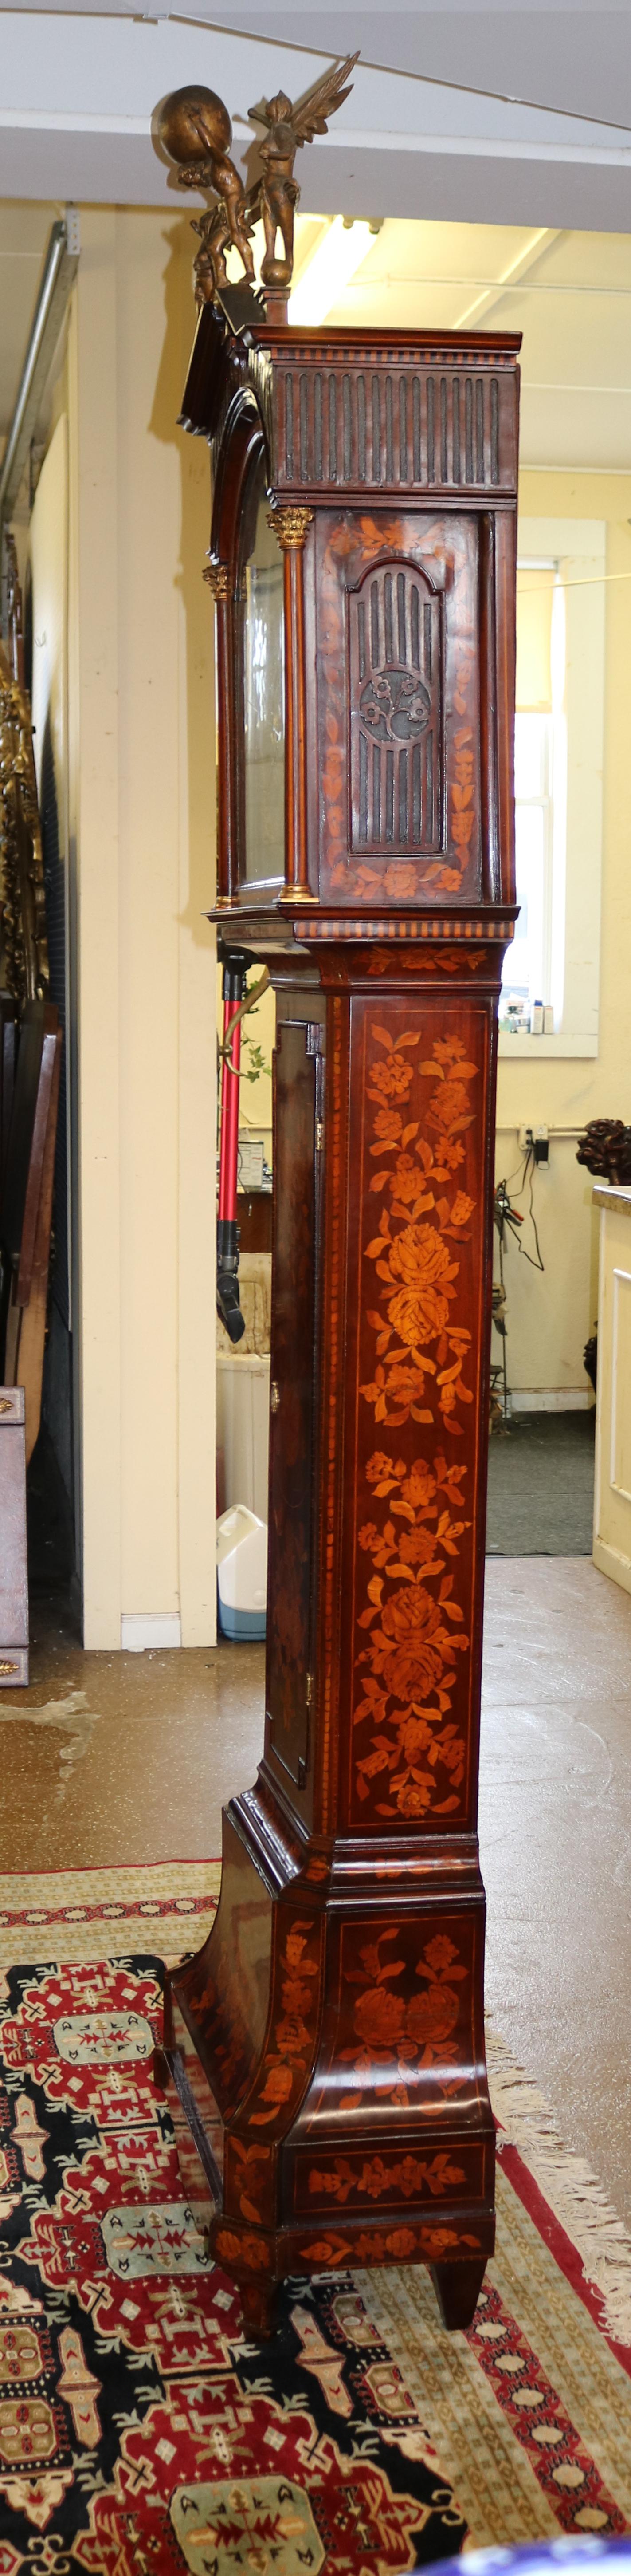 Late 18th Century Figural Dutch Marquetry Tall Case Grandfather Clock  For Sale 3